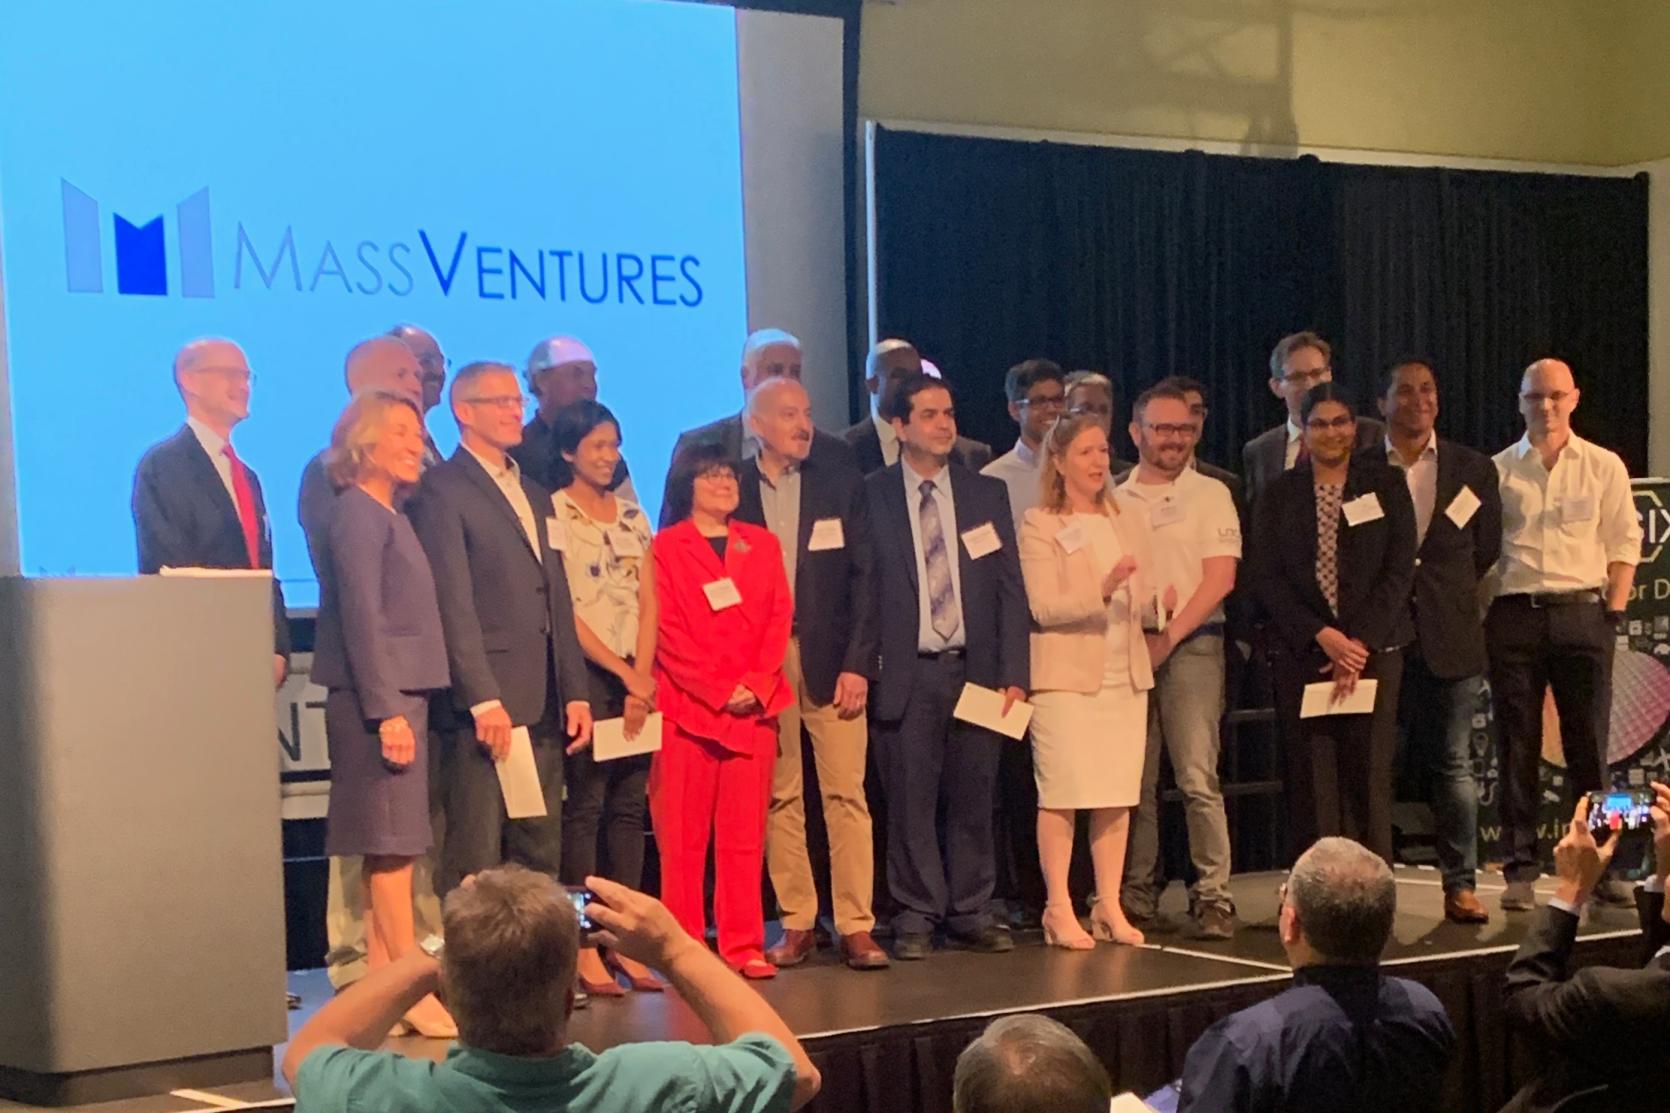 the Baker-Polito Administration awarded $3.3 million to 19 innovative, early-stage, high-growth companies in Massachusetts. Made possible by a collaboration between the MassVentures START program and the MassCEC